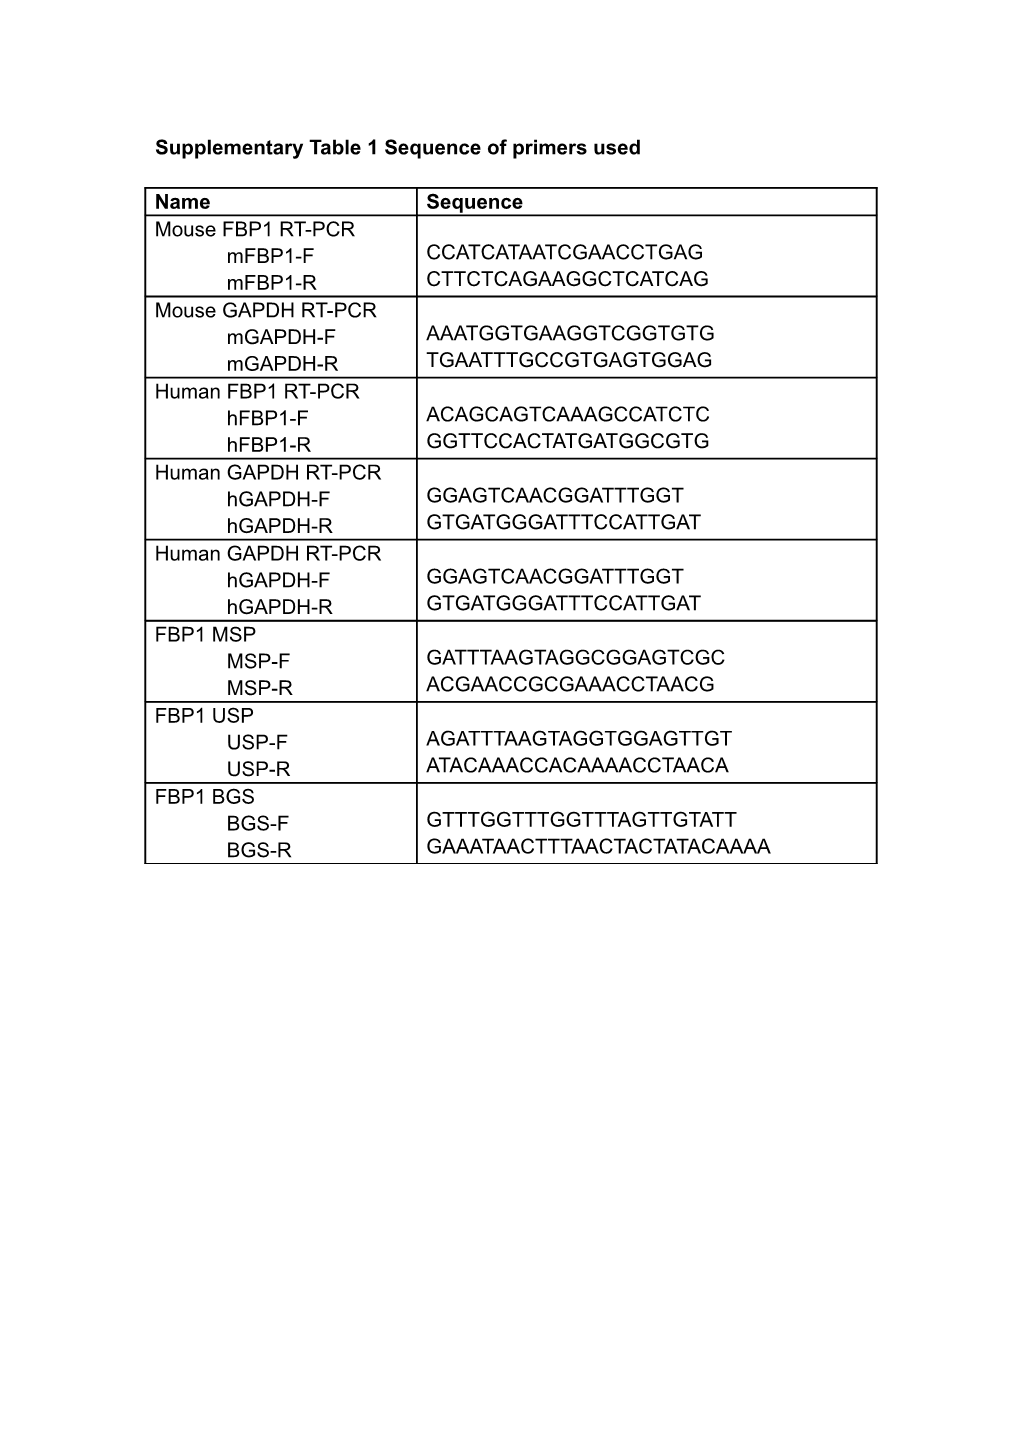 Supplementary Table 1 Sequence of Primers Used